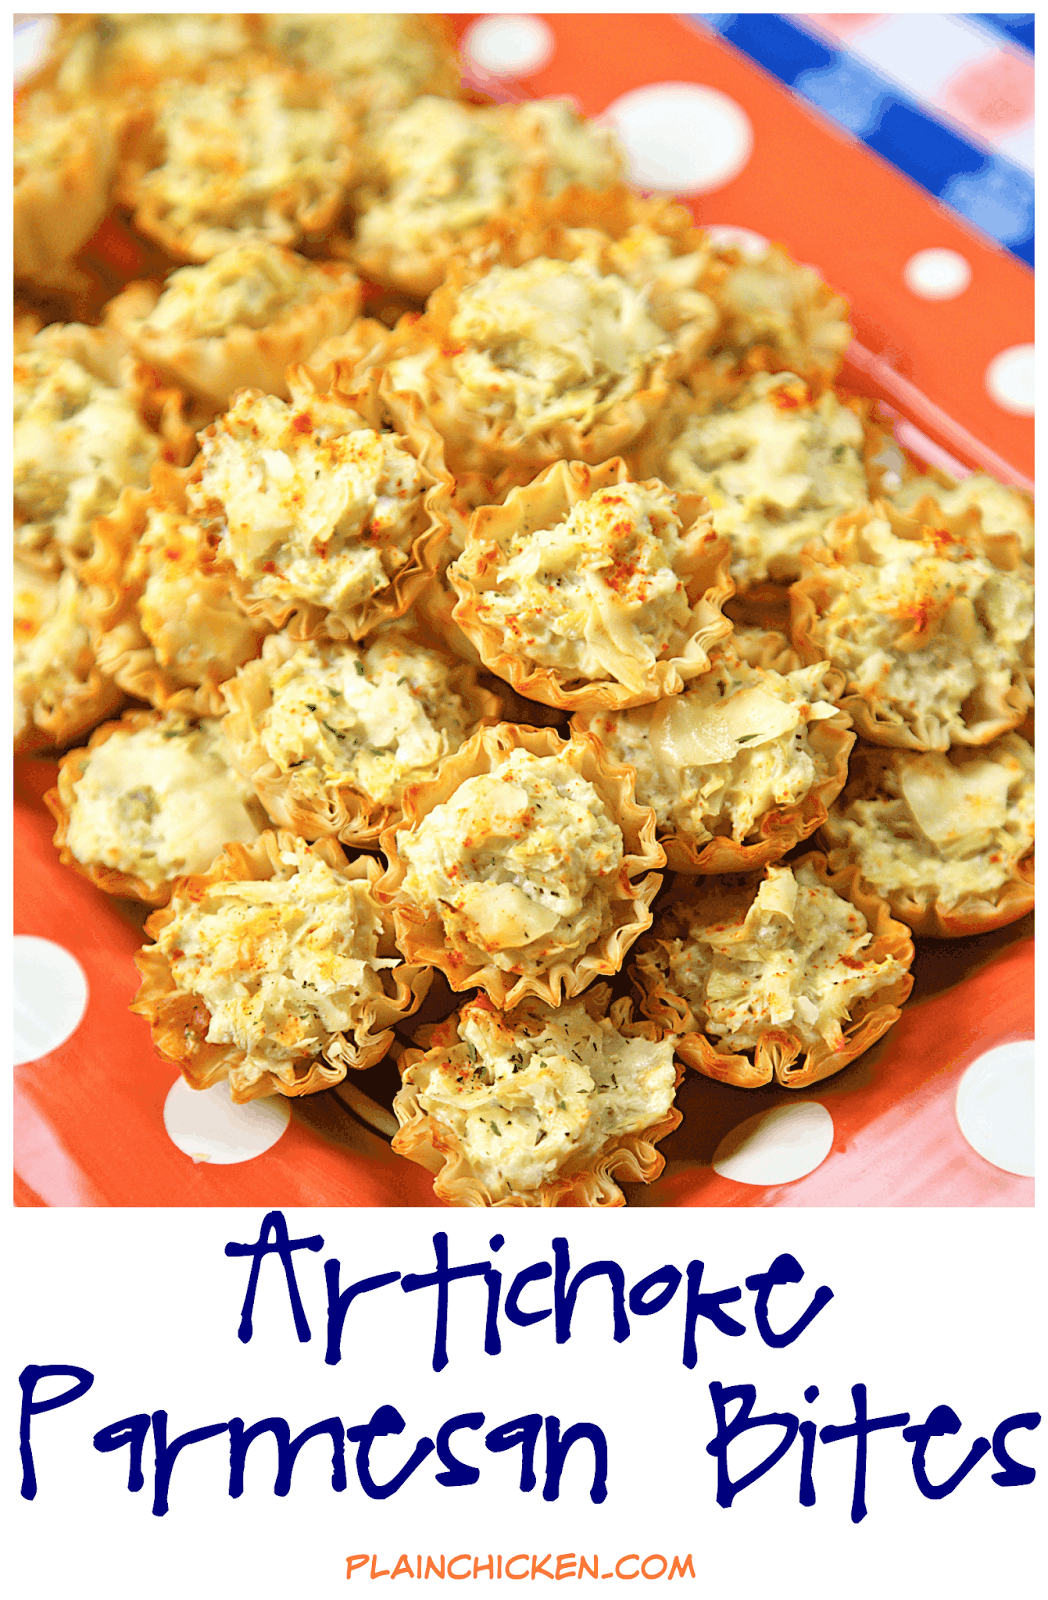 Artichoke Parmesan Bites - only 5 ingredients! Can make ahead of time and refrigerate or freeze for later. Great for parties! We could not stop eating these. YUM!